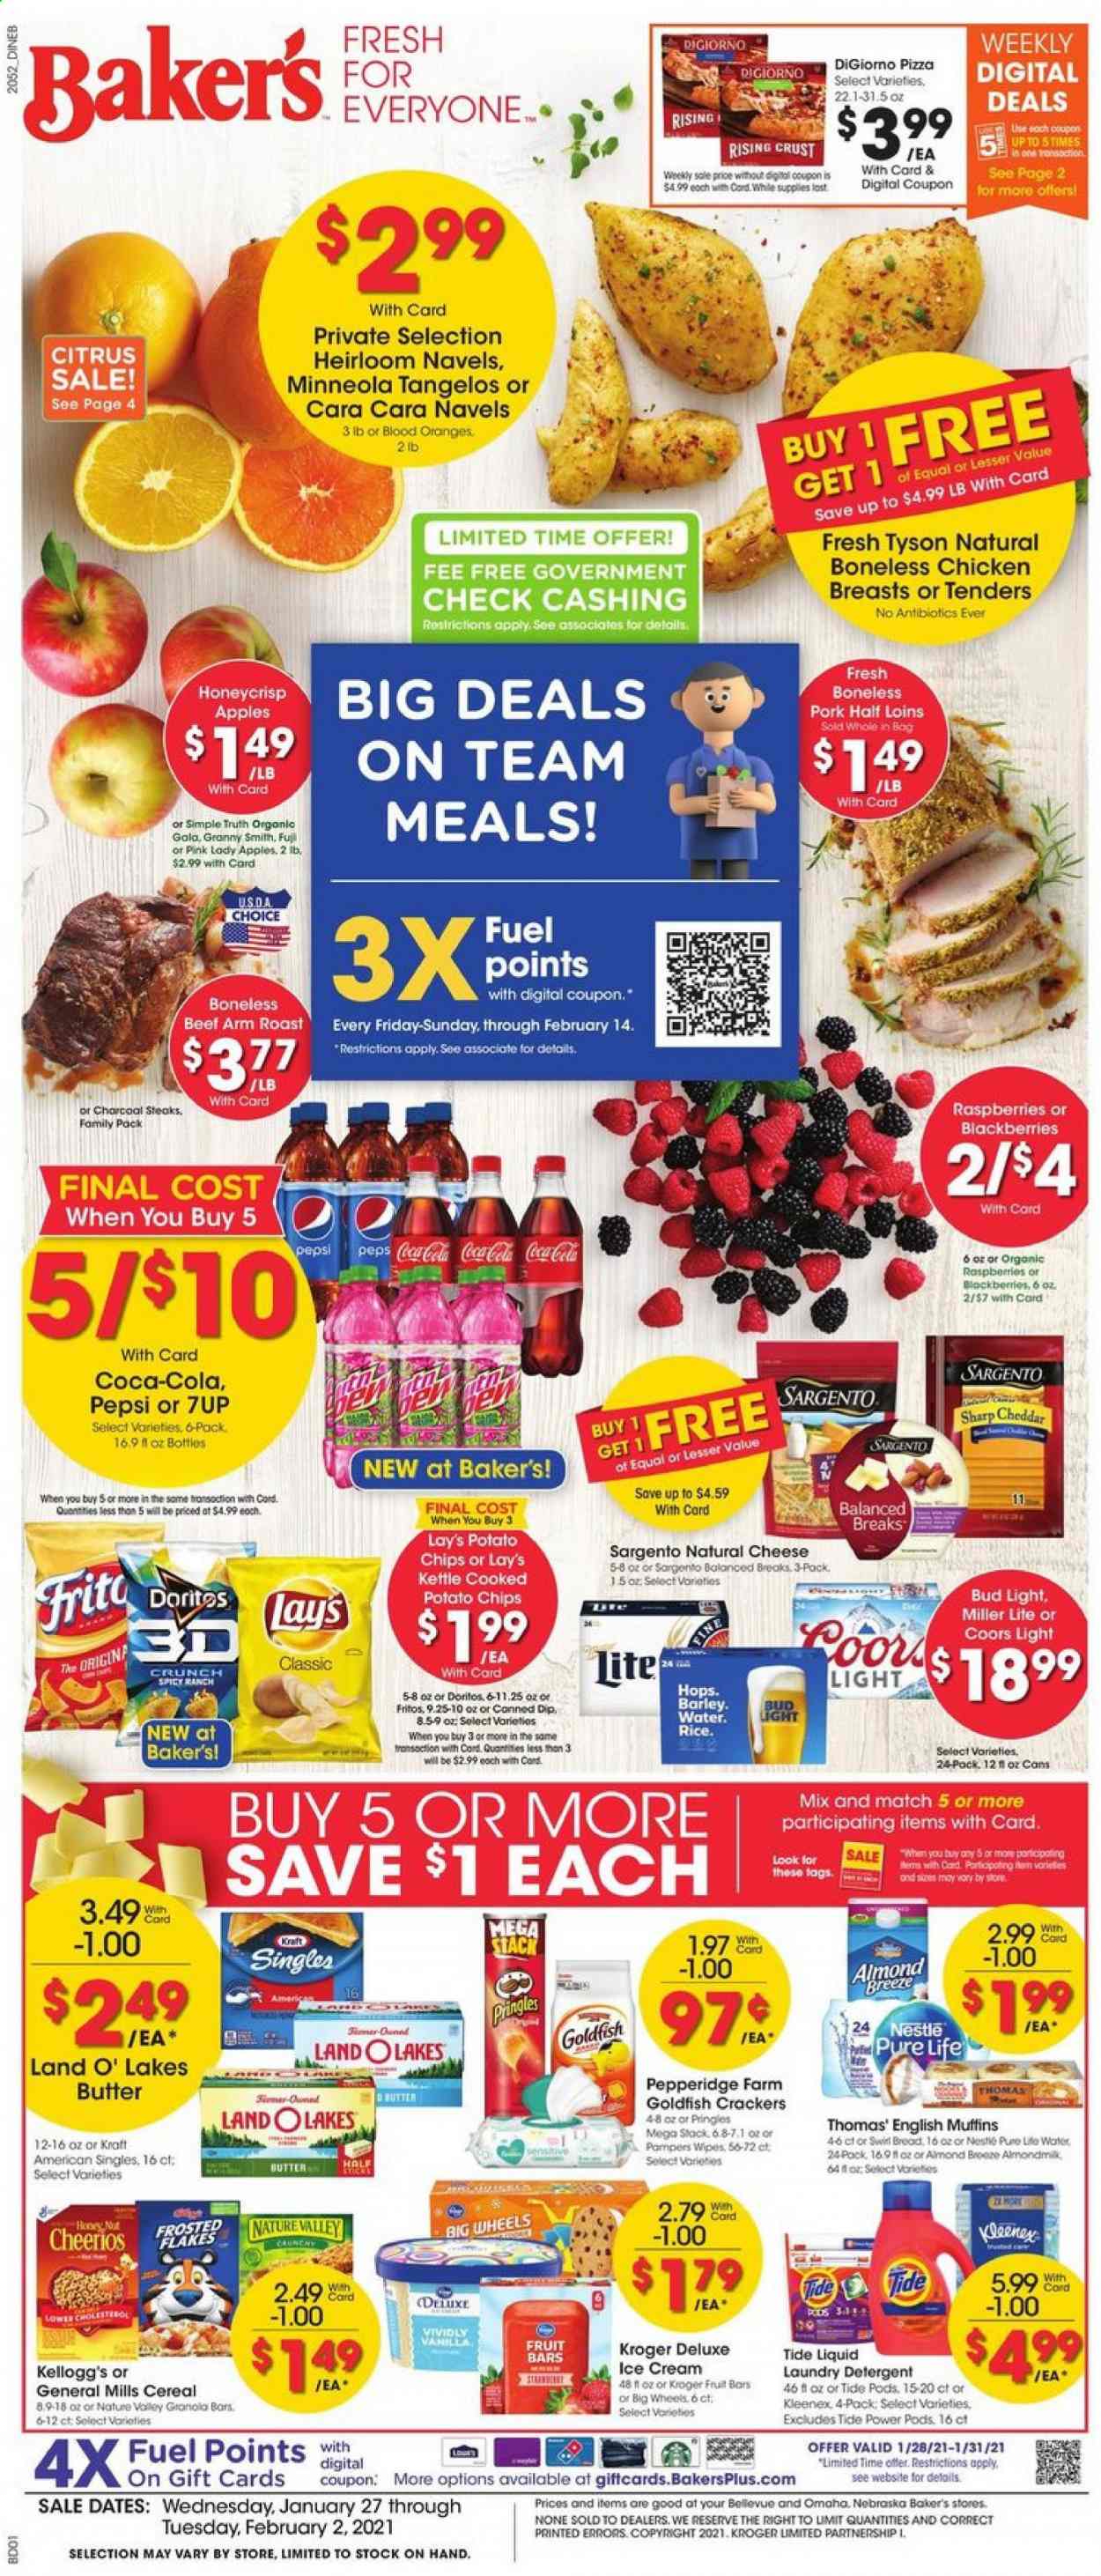 thumbnail - Baker's Flyer - 01/27/2021 - 02/02/2021 - Sales products - blackberries, raspberries, tangelos, muffin, apples, oranges, english muffins, pizza, Kraft®, cheddar, cheese, Kraft Singles, Sargento, Almond Breeze, butter, dip, ice cream, Nestlé, crackers, Kellogg's, Doritos, potato chips, Pringles, chips, Lay’s, Goldfish, cereals, Fritos, granola, Cheerios, Frosted Flakes, Coca-Cola, Pepsi, 7UP, L'Or, beer, Miller Lite, Coors, Bud Light, chicken breasts, steak, Pampers, Kleenex, detergent, wipes, Tide, laundry detergent, Sharp, Bakers, Gola, charcoal. Page 1.